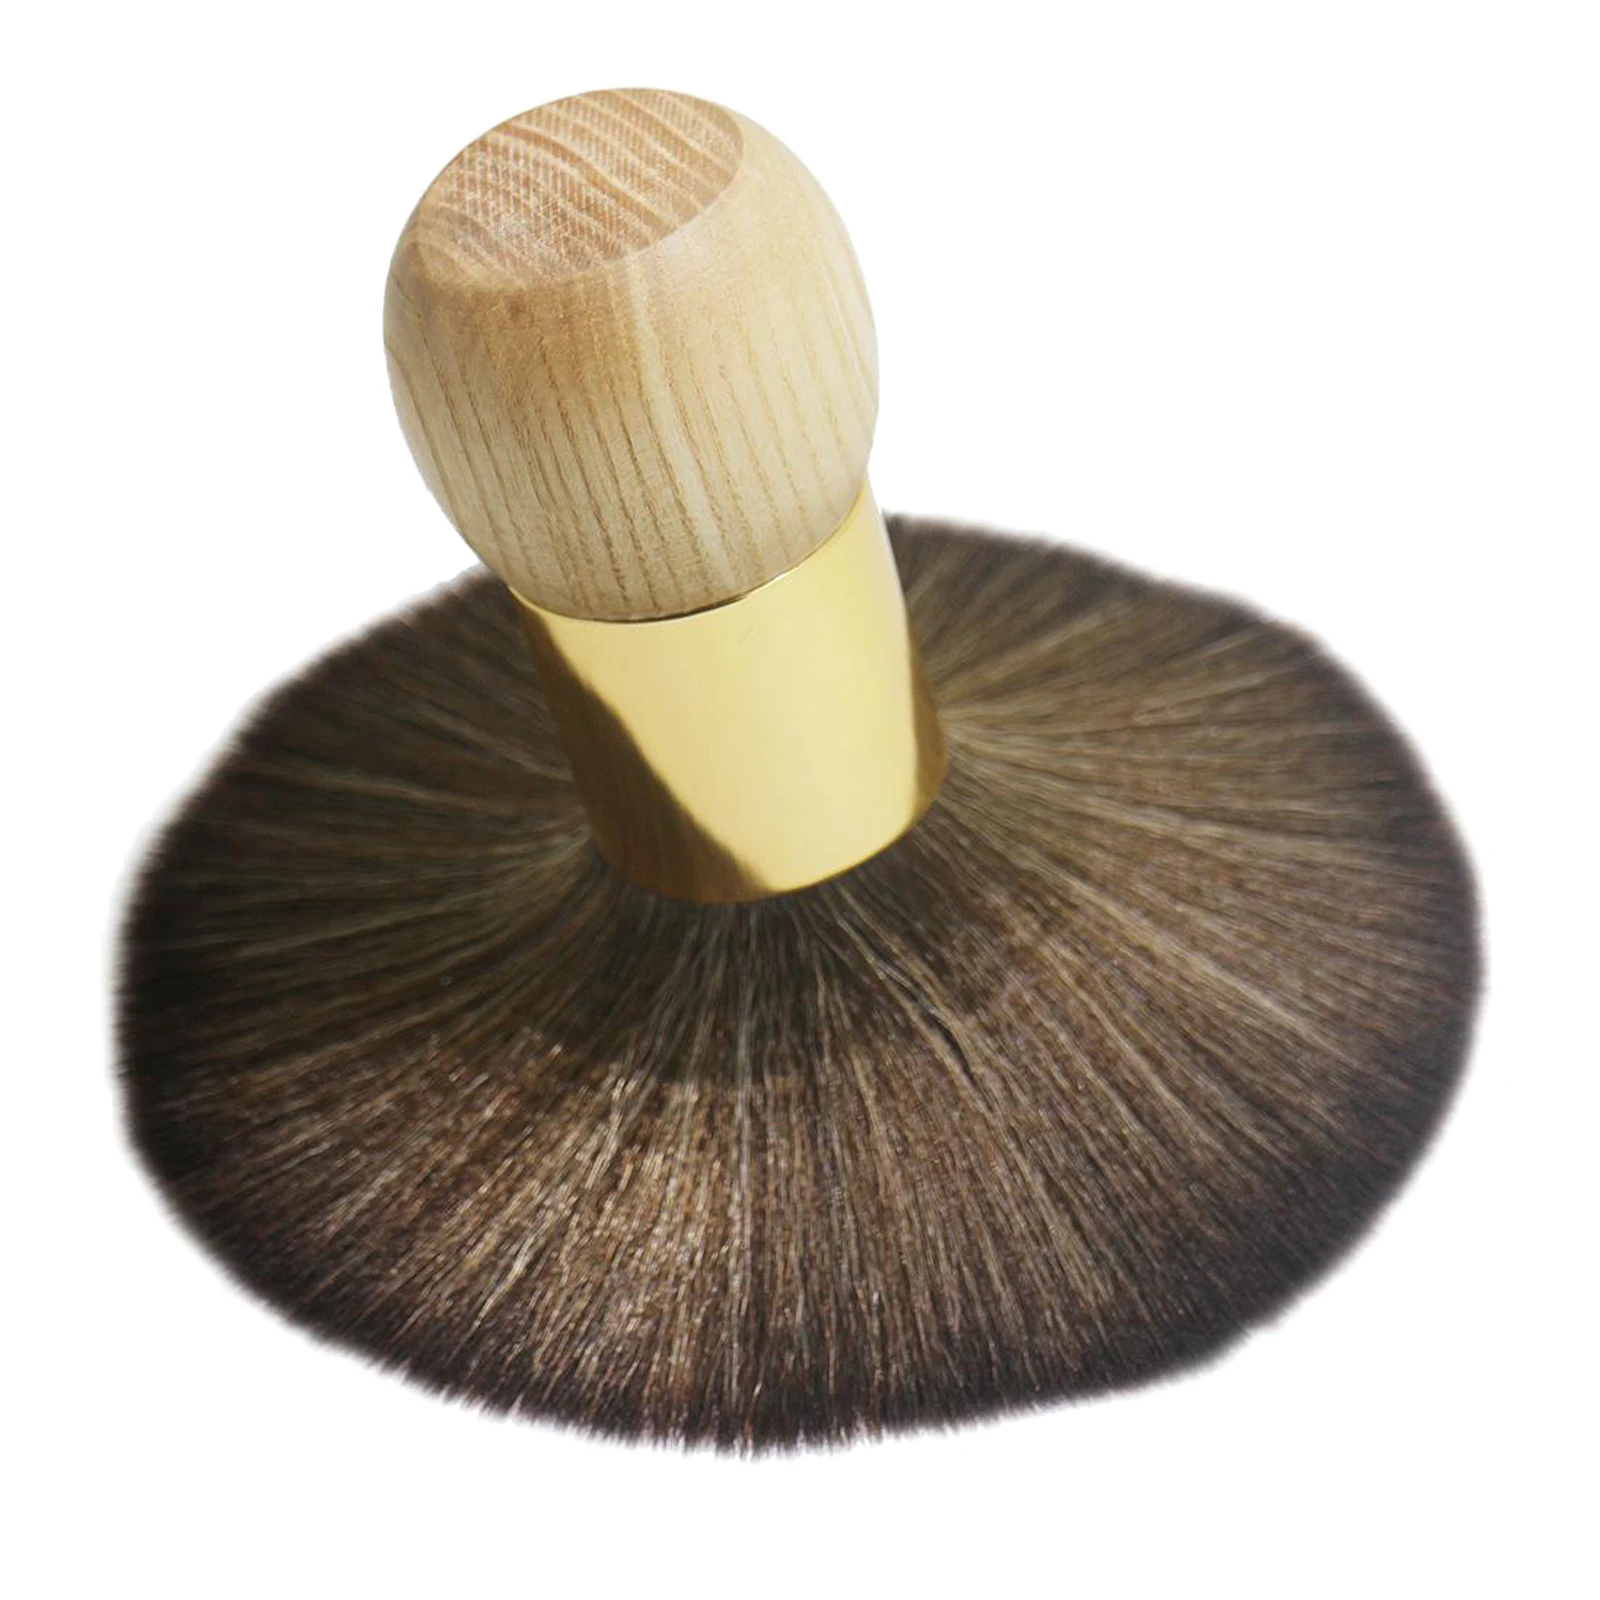 Wooden Hairbrush Haircut for Salon Barber Cleaning Remove Hair Clippings